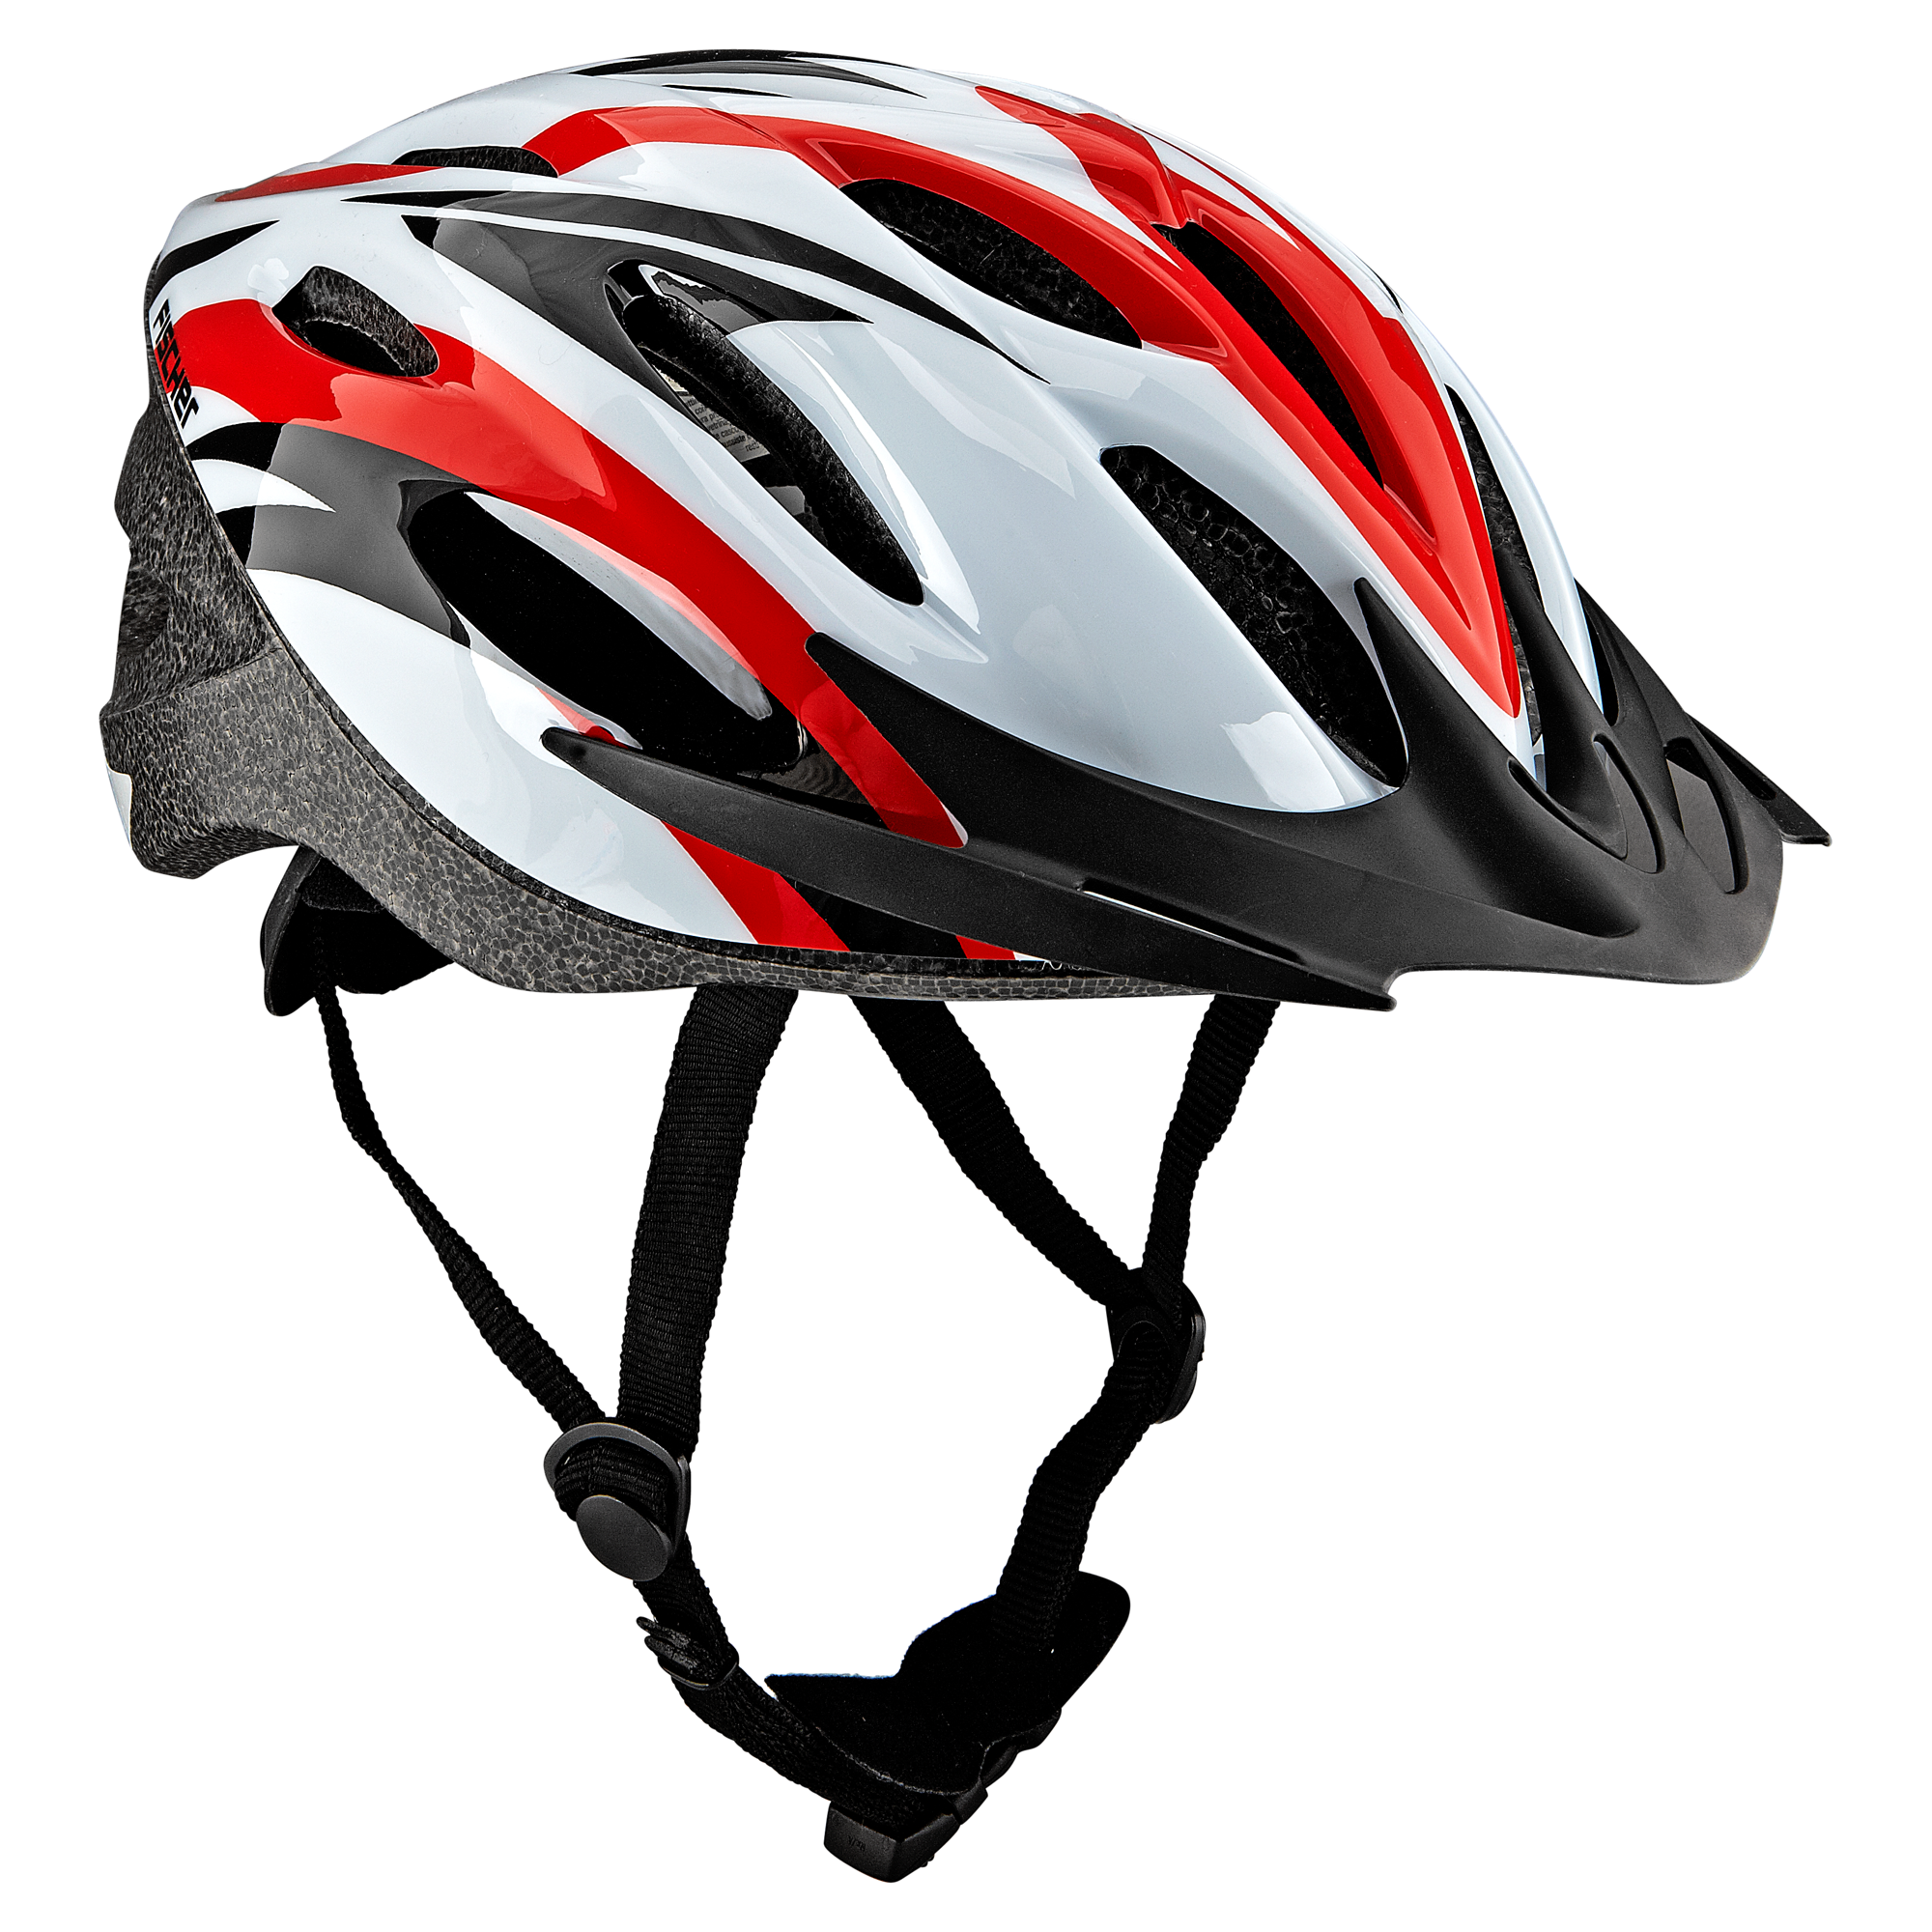 Fahrradhelm "Red" + product picture